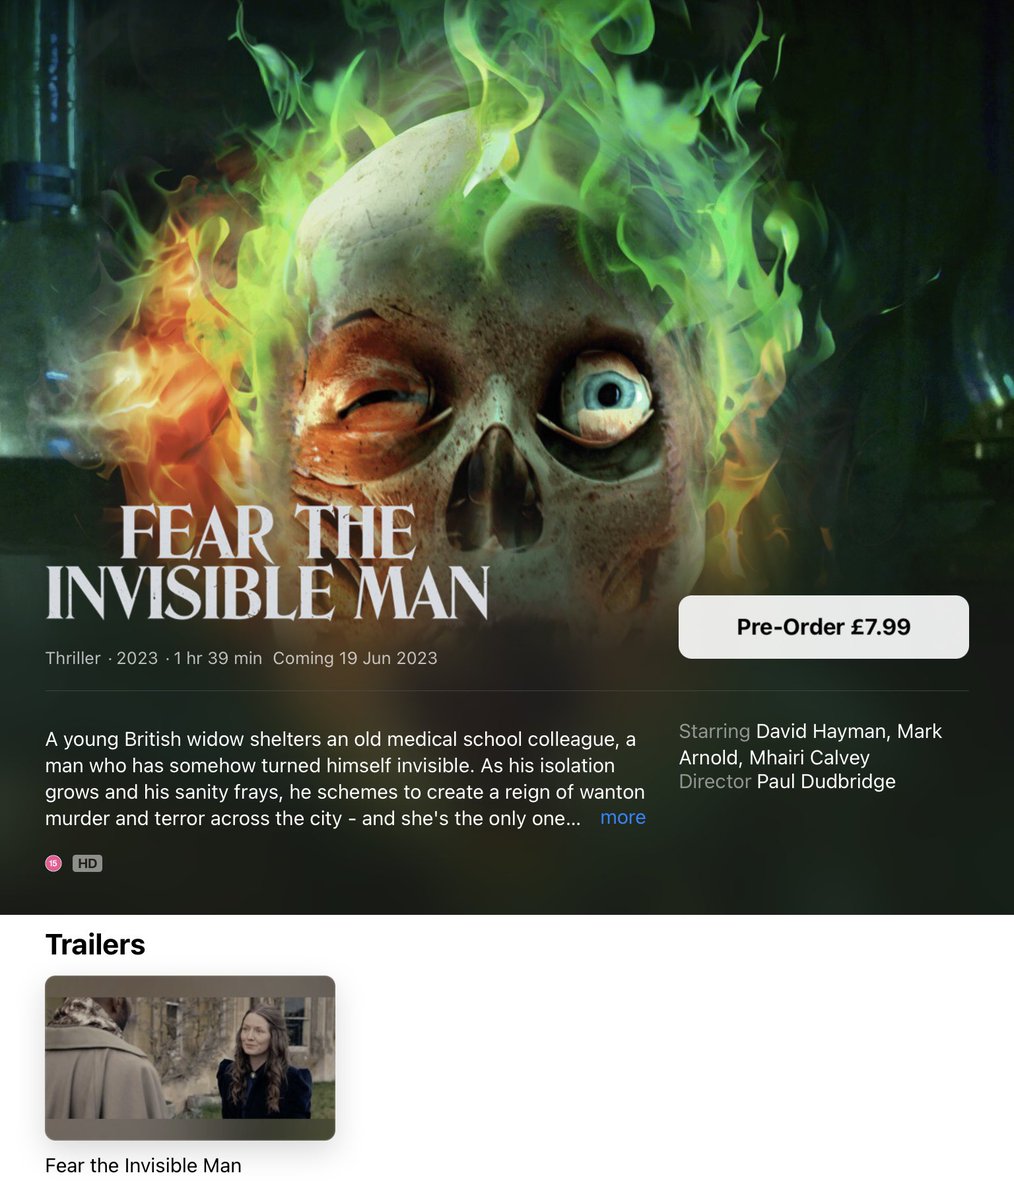 .@AppleTV is just one of the platforms hosting our new film, Fear the Invisible Man. It’s released on June 19th in HD & 5.1 sound too. 
#AppleTV #hgwells #filmmaking #theinvisibleman #victorian #period #mandmfilmproductions #hanoverpictures #101filmsinternational